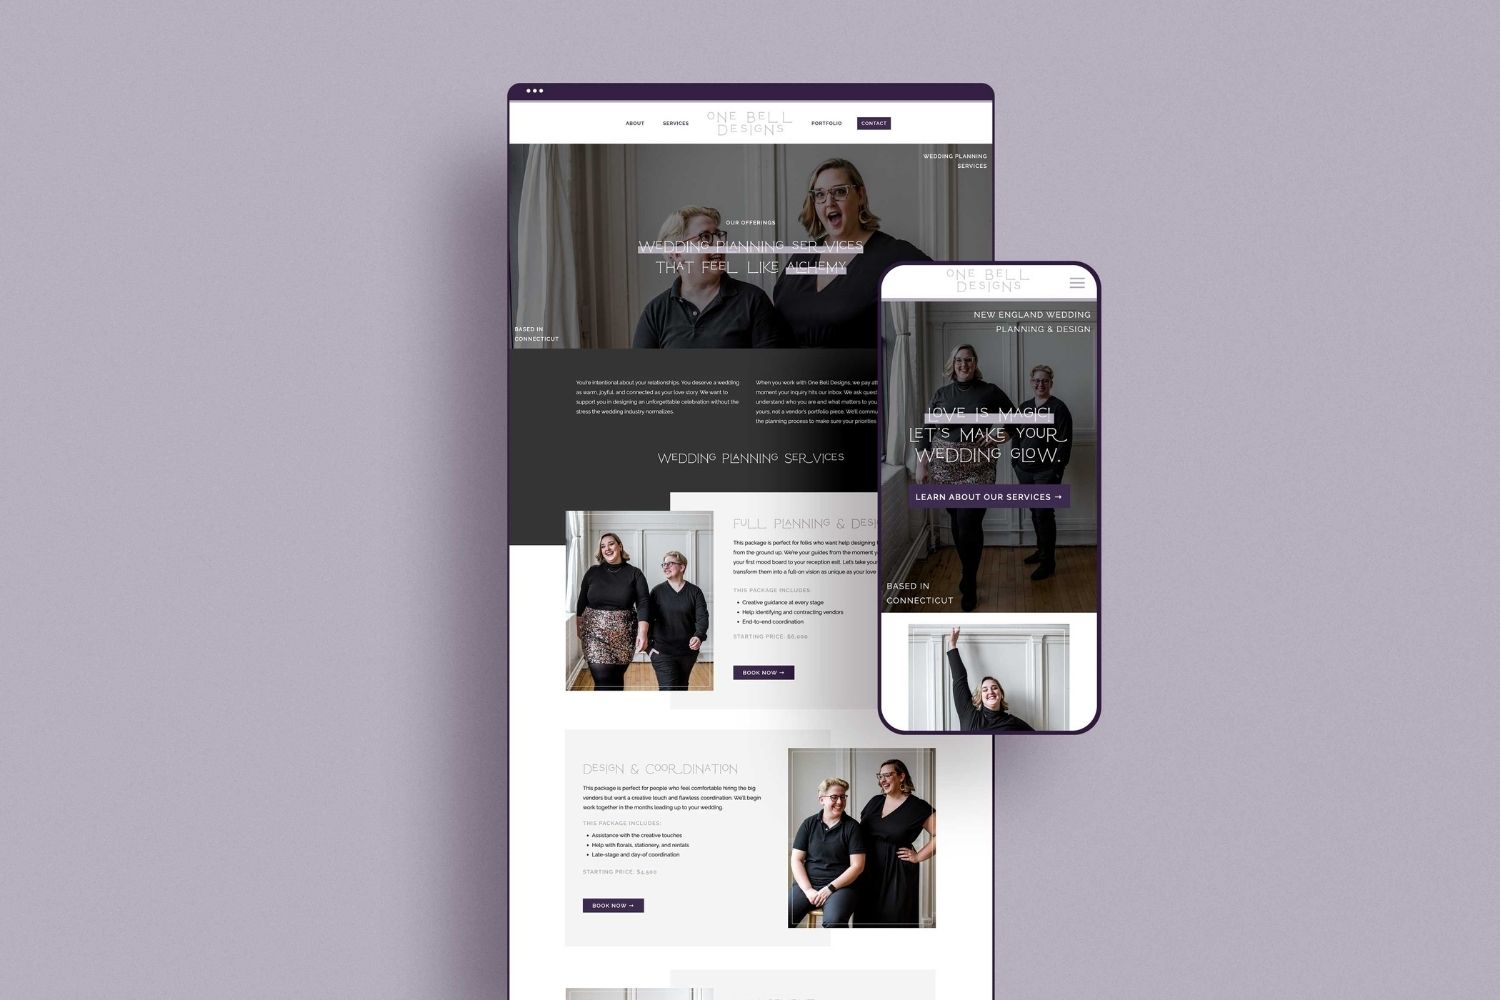 Wedding planner Showit website design pulled up on a screen and phone with a purple background